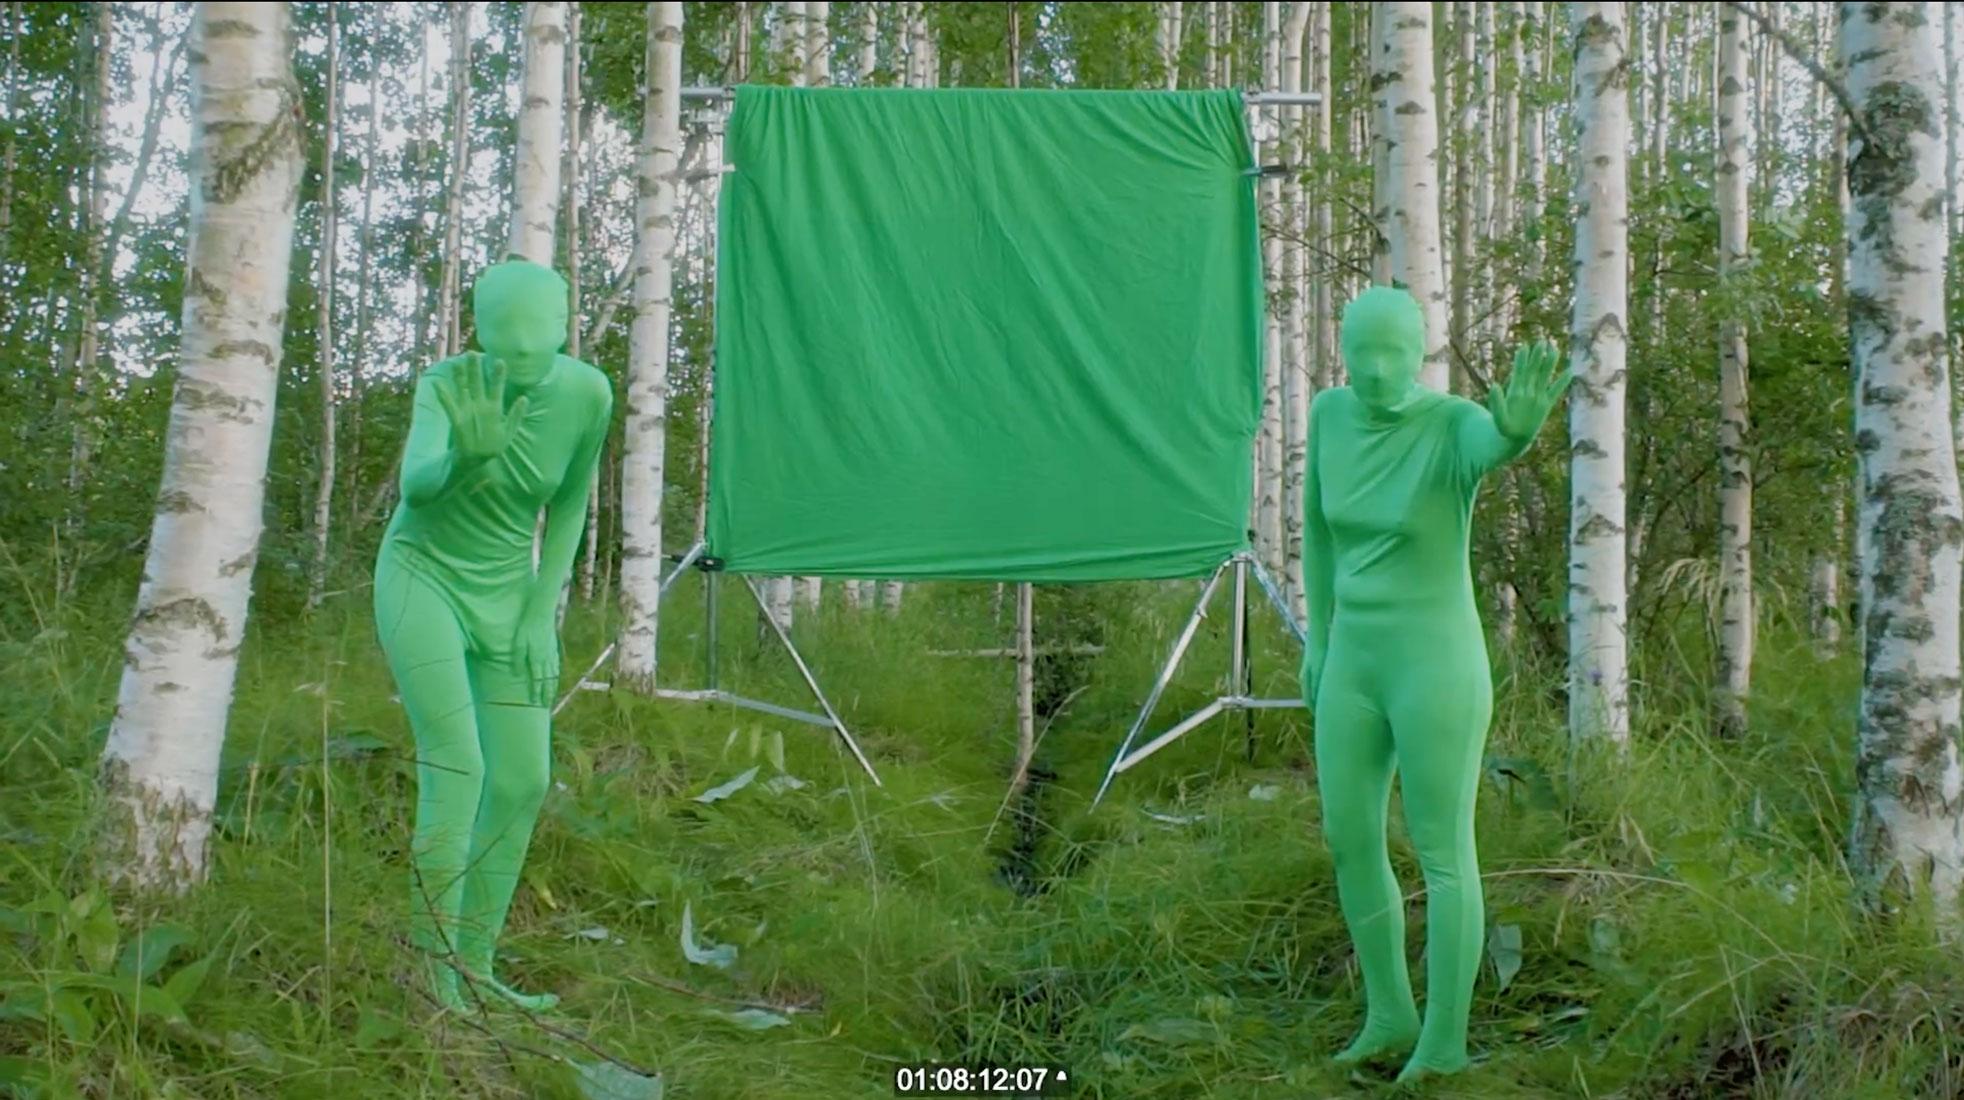 Two humans, covered in green fabric from head to toe, stand in a forest area with green grass and birch trees. There is a green fabric screen hanging in between them, and they are both looking into the camera.